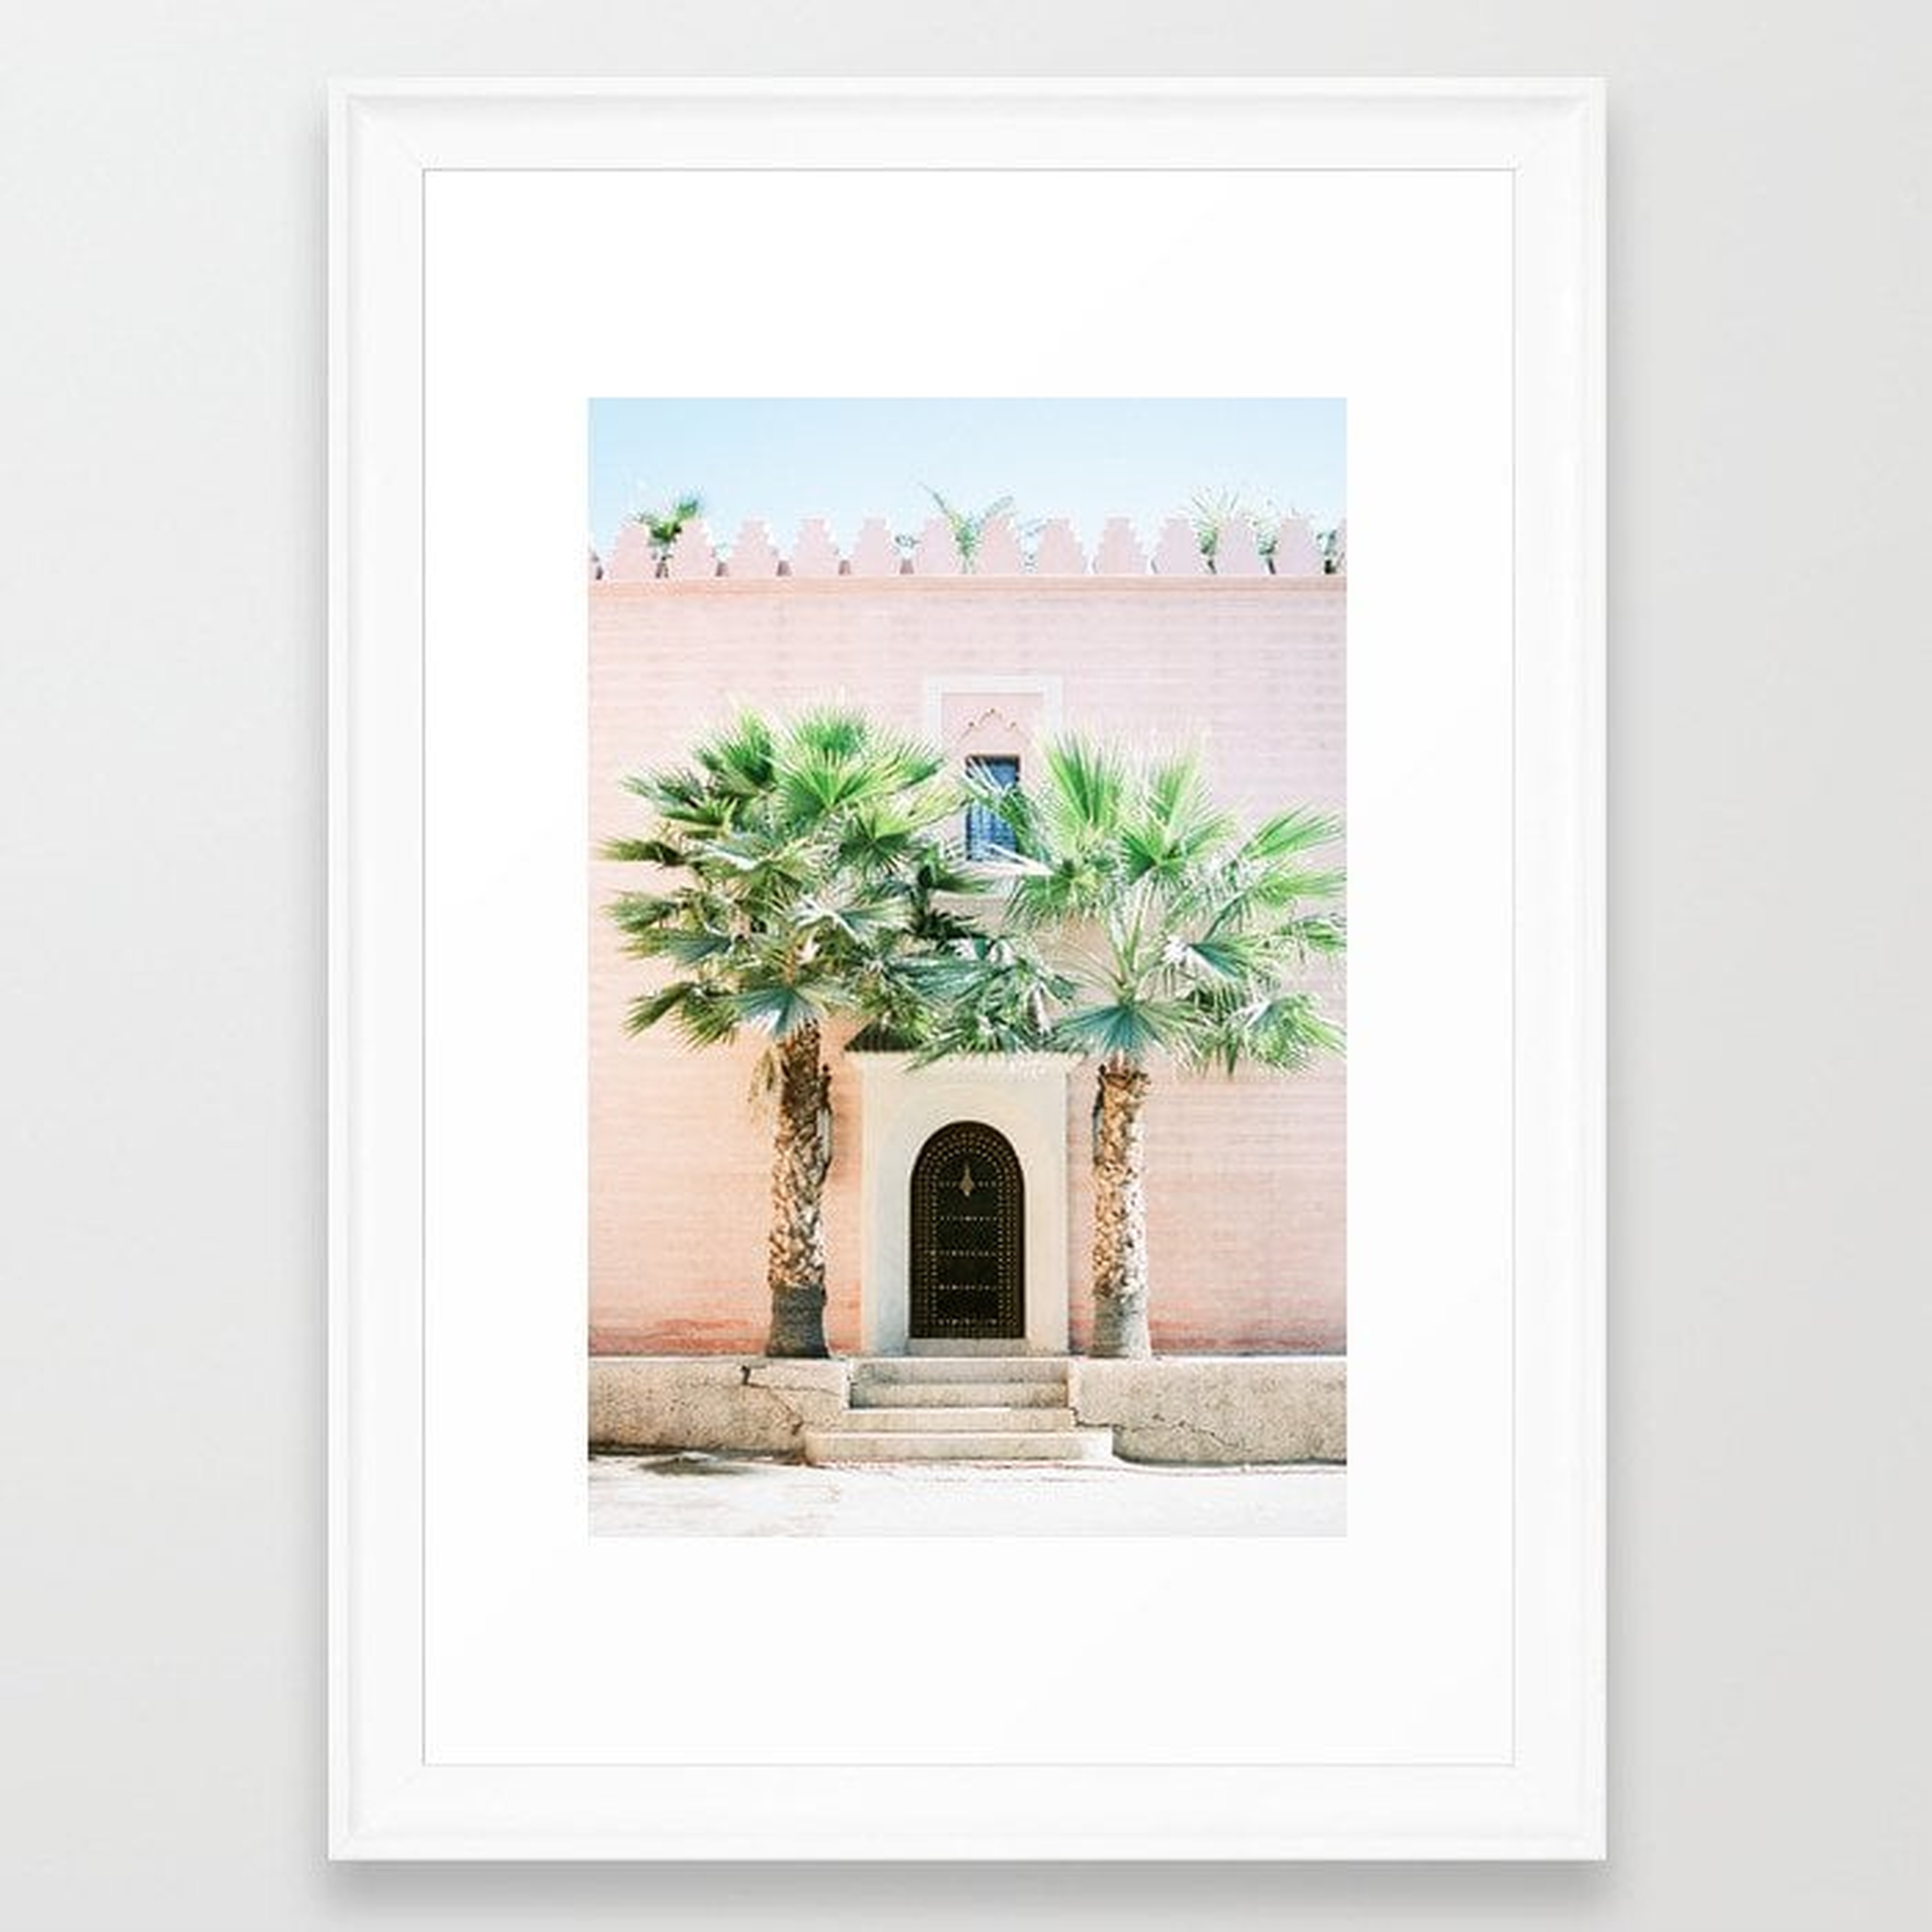 Travel photography print “Magical Marrakech” photo art made in Morocco. Pastel colored. Framed Art Print - Society6